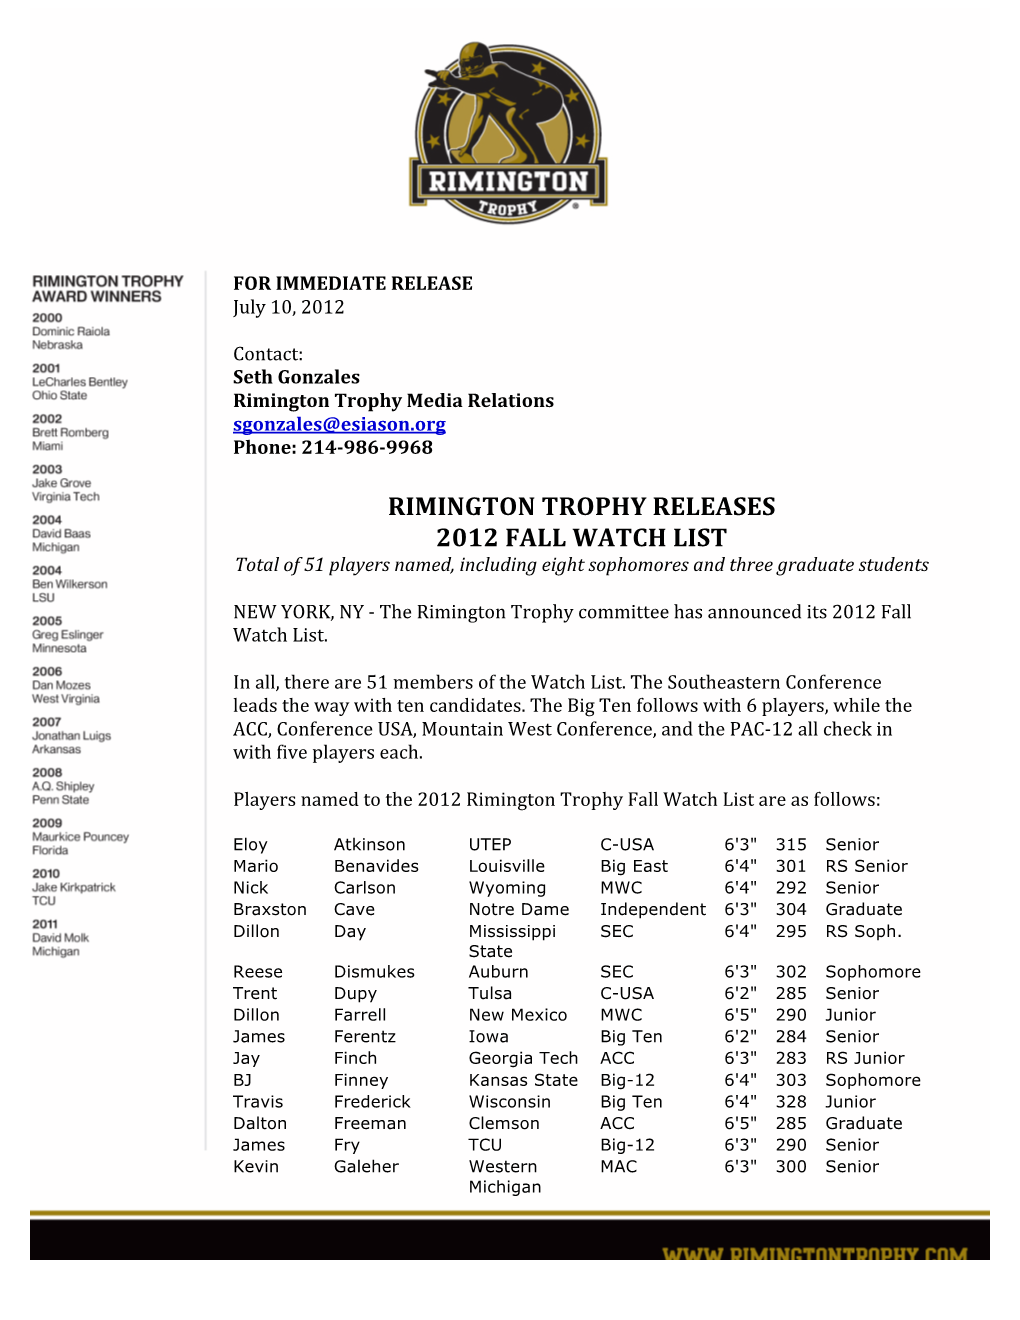 RIMINGTON TROPHY RELEASES 2012 FALL WATCH LIST Total of 51 Players Named, Including Eight Sophomores and Three Graduate Students